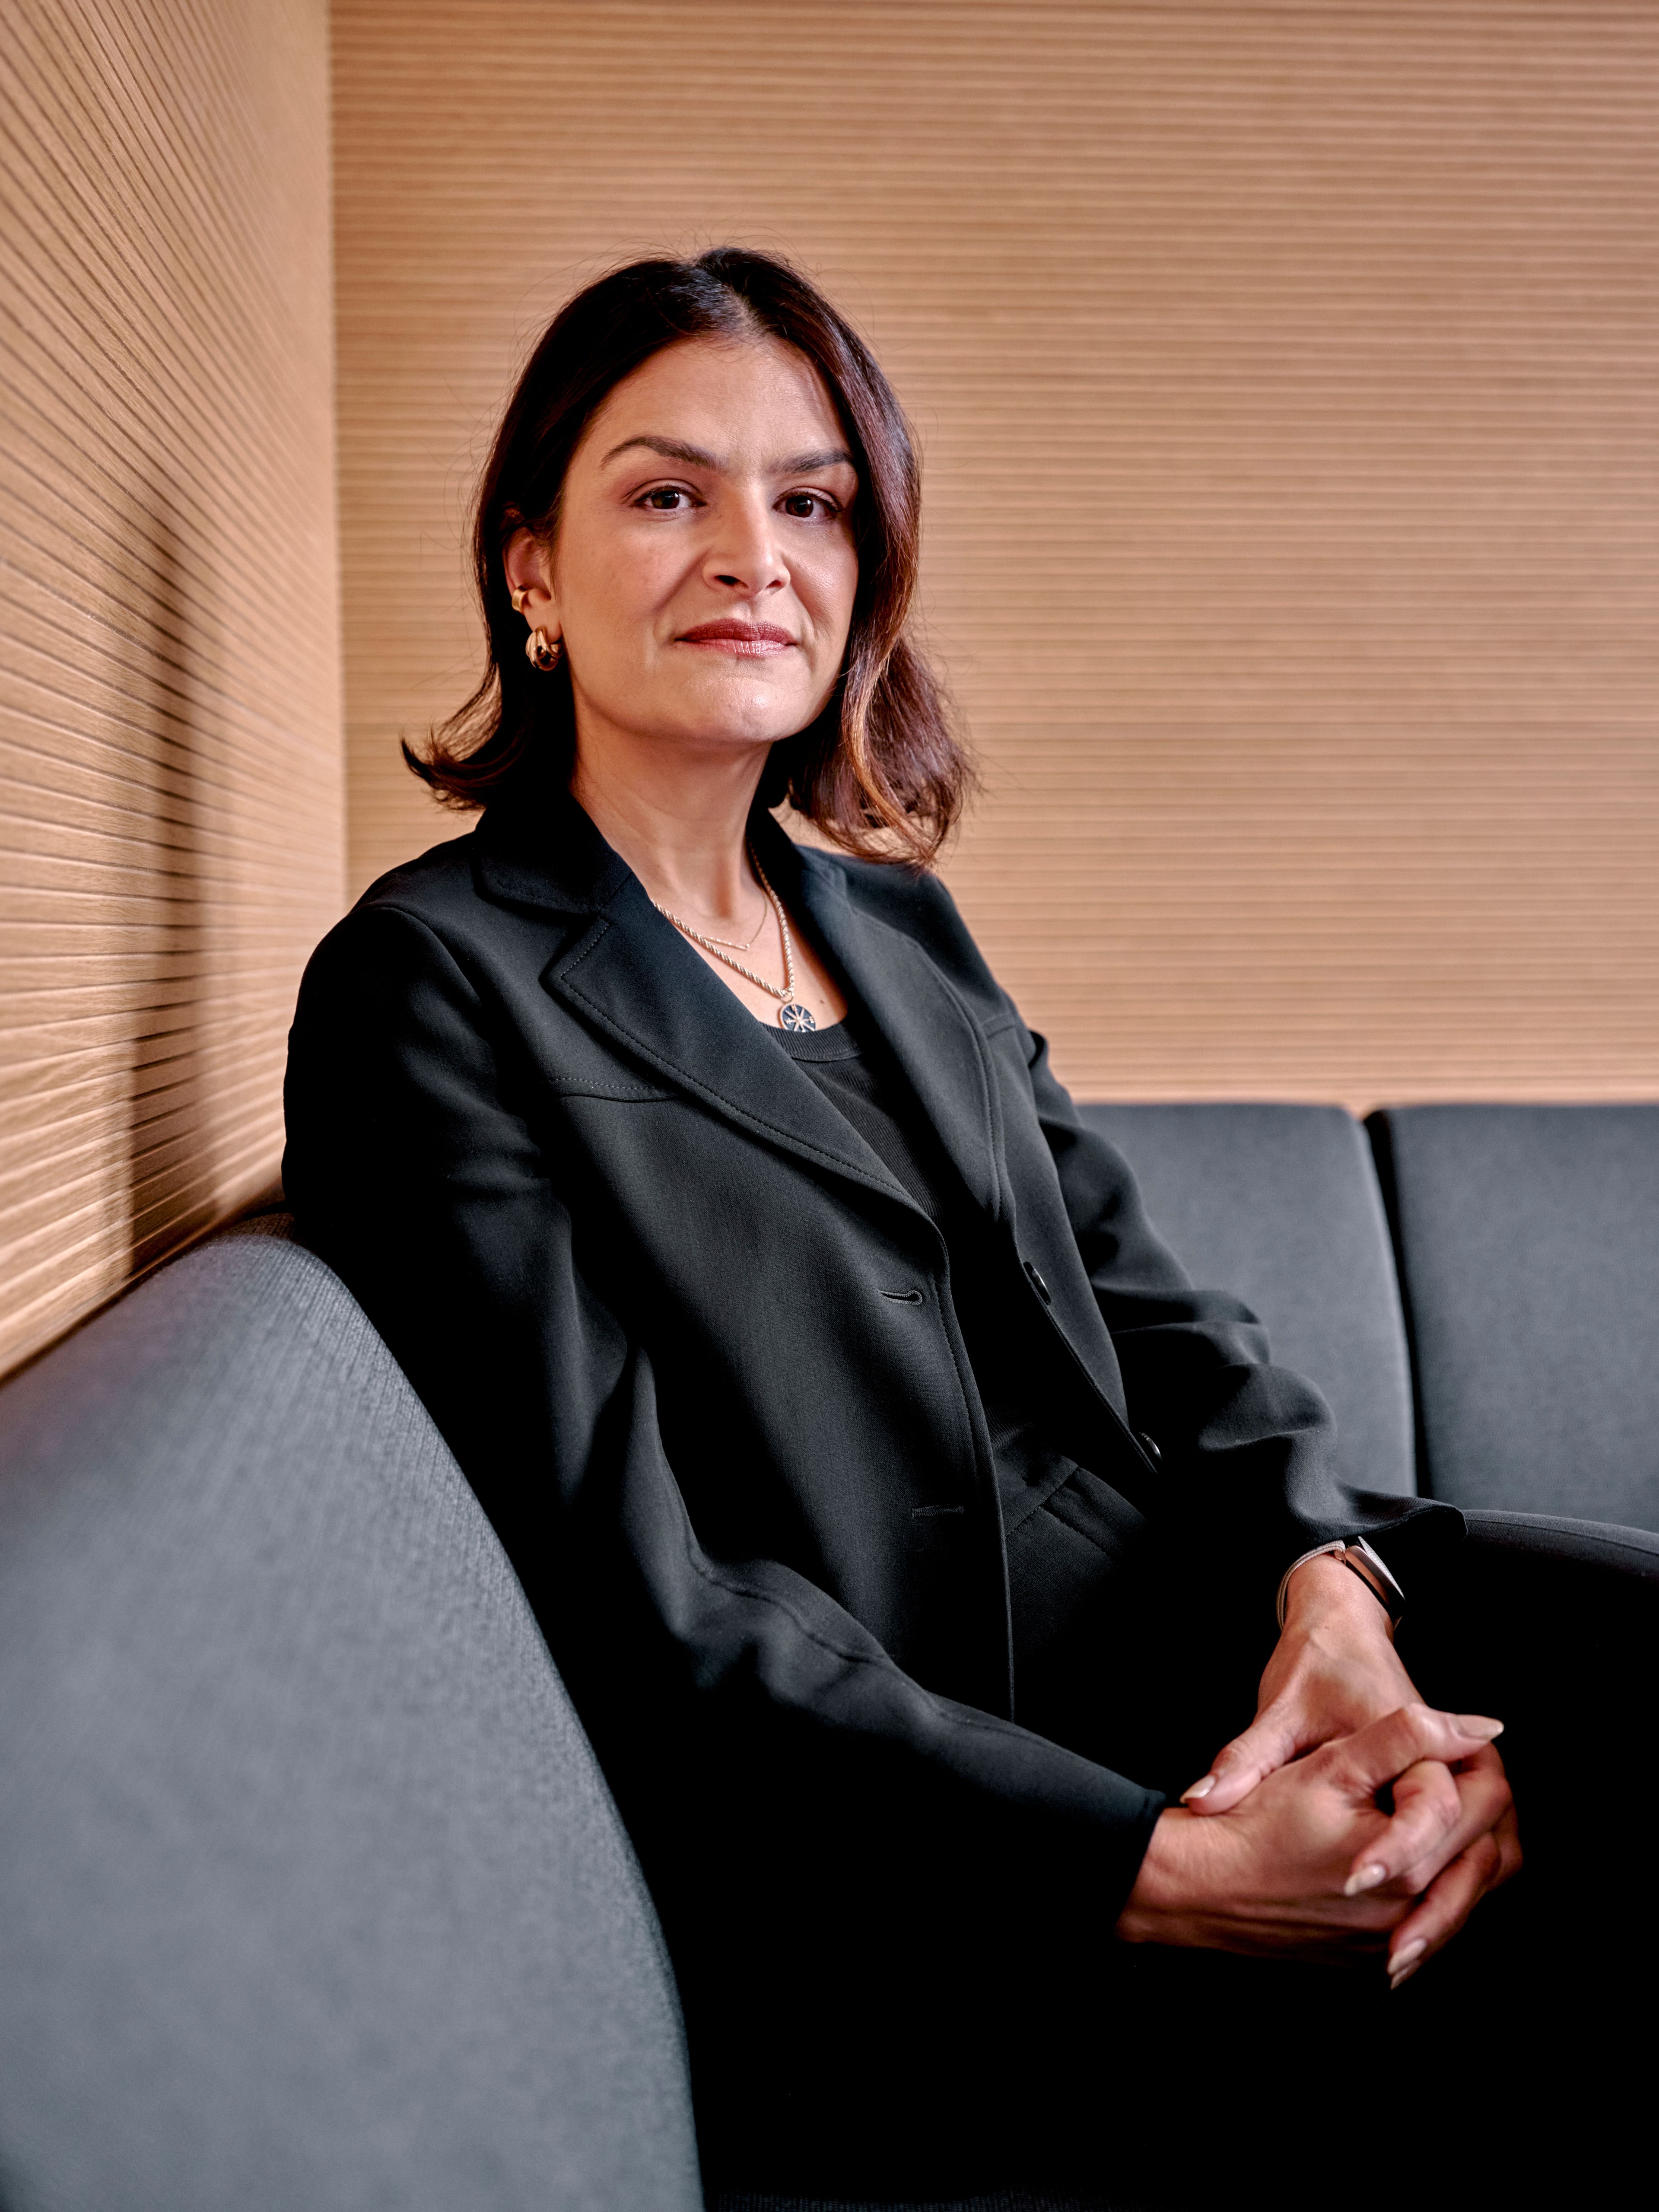 Sima Sistani, CEO of WeightWatchers